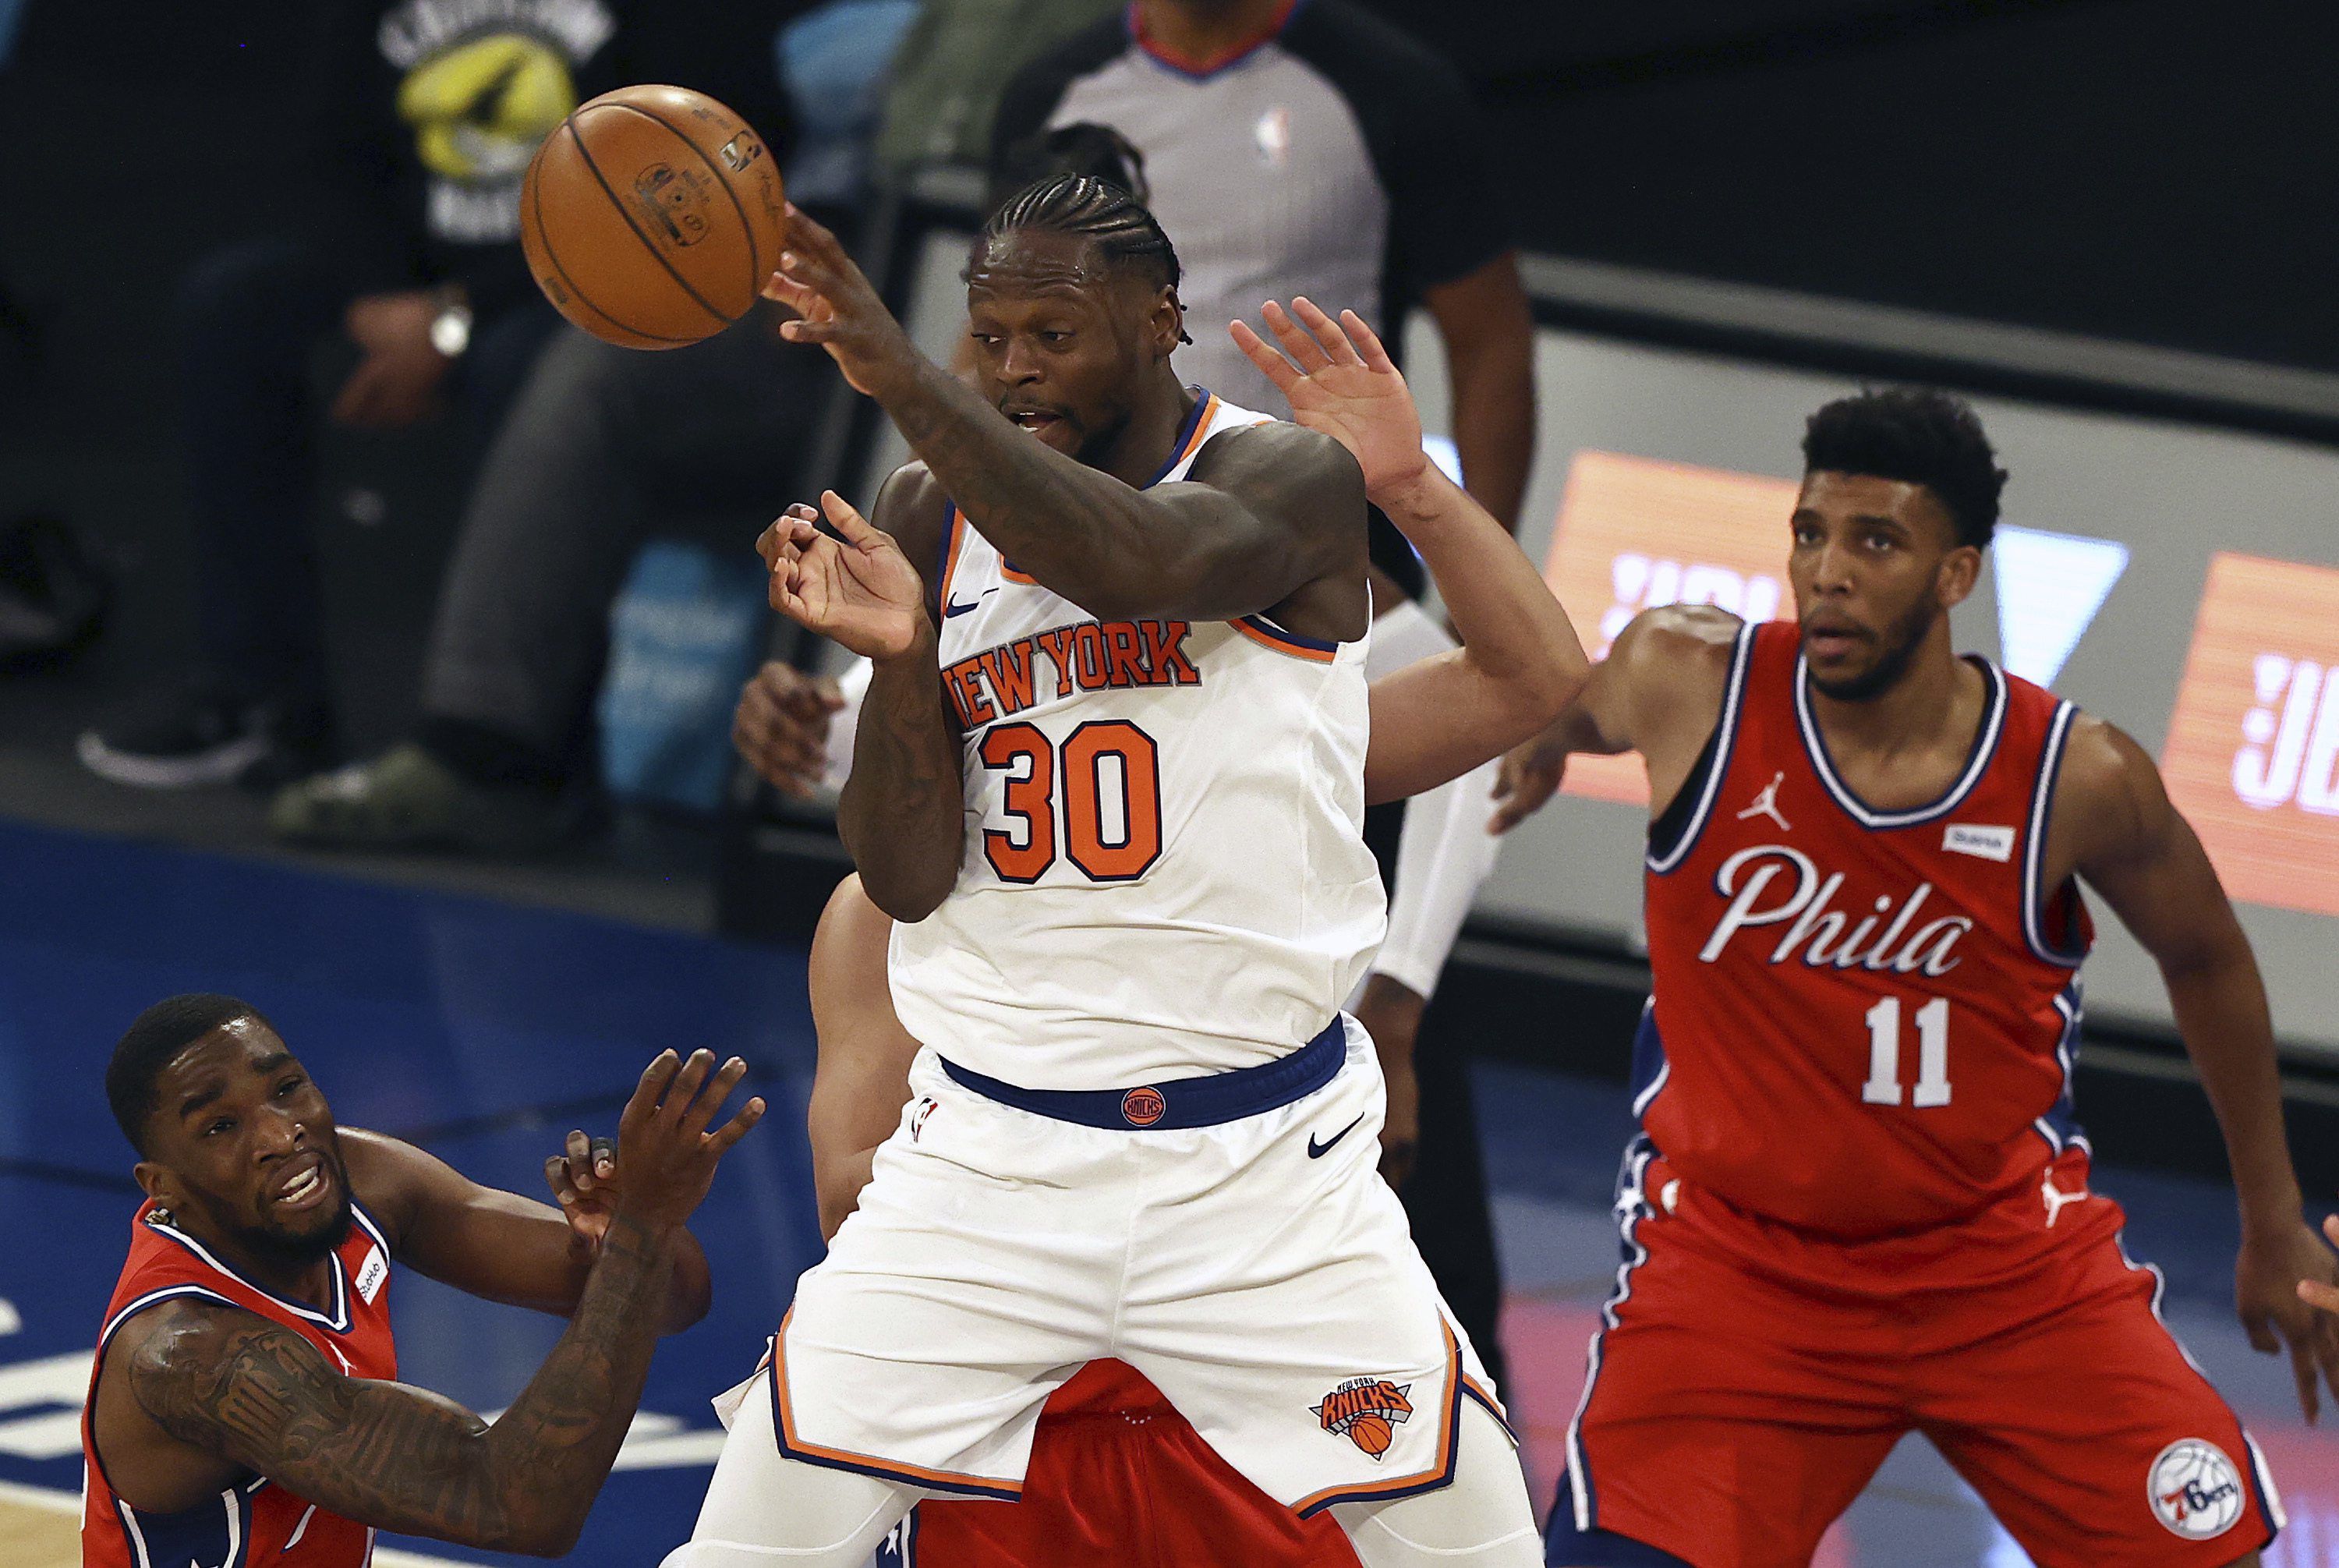 New York Knicks: Will The Losses Have An Economic Effect?